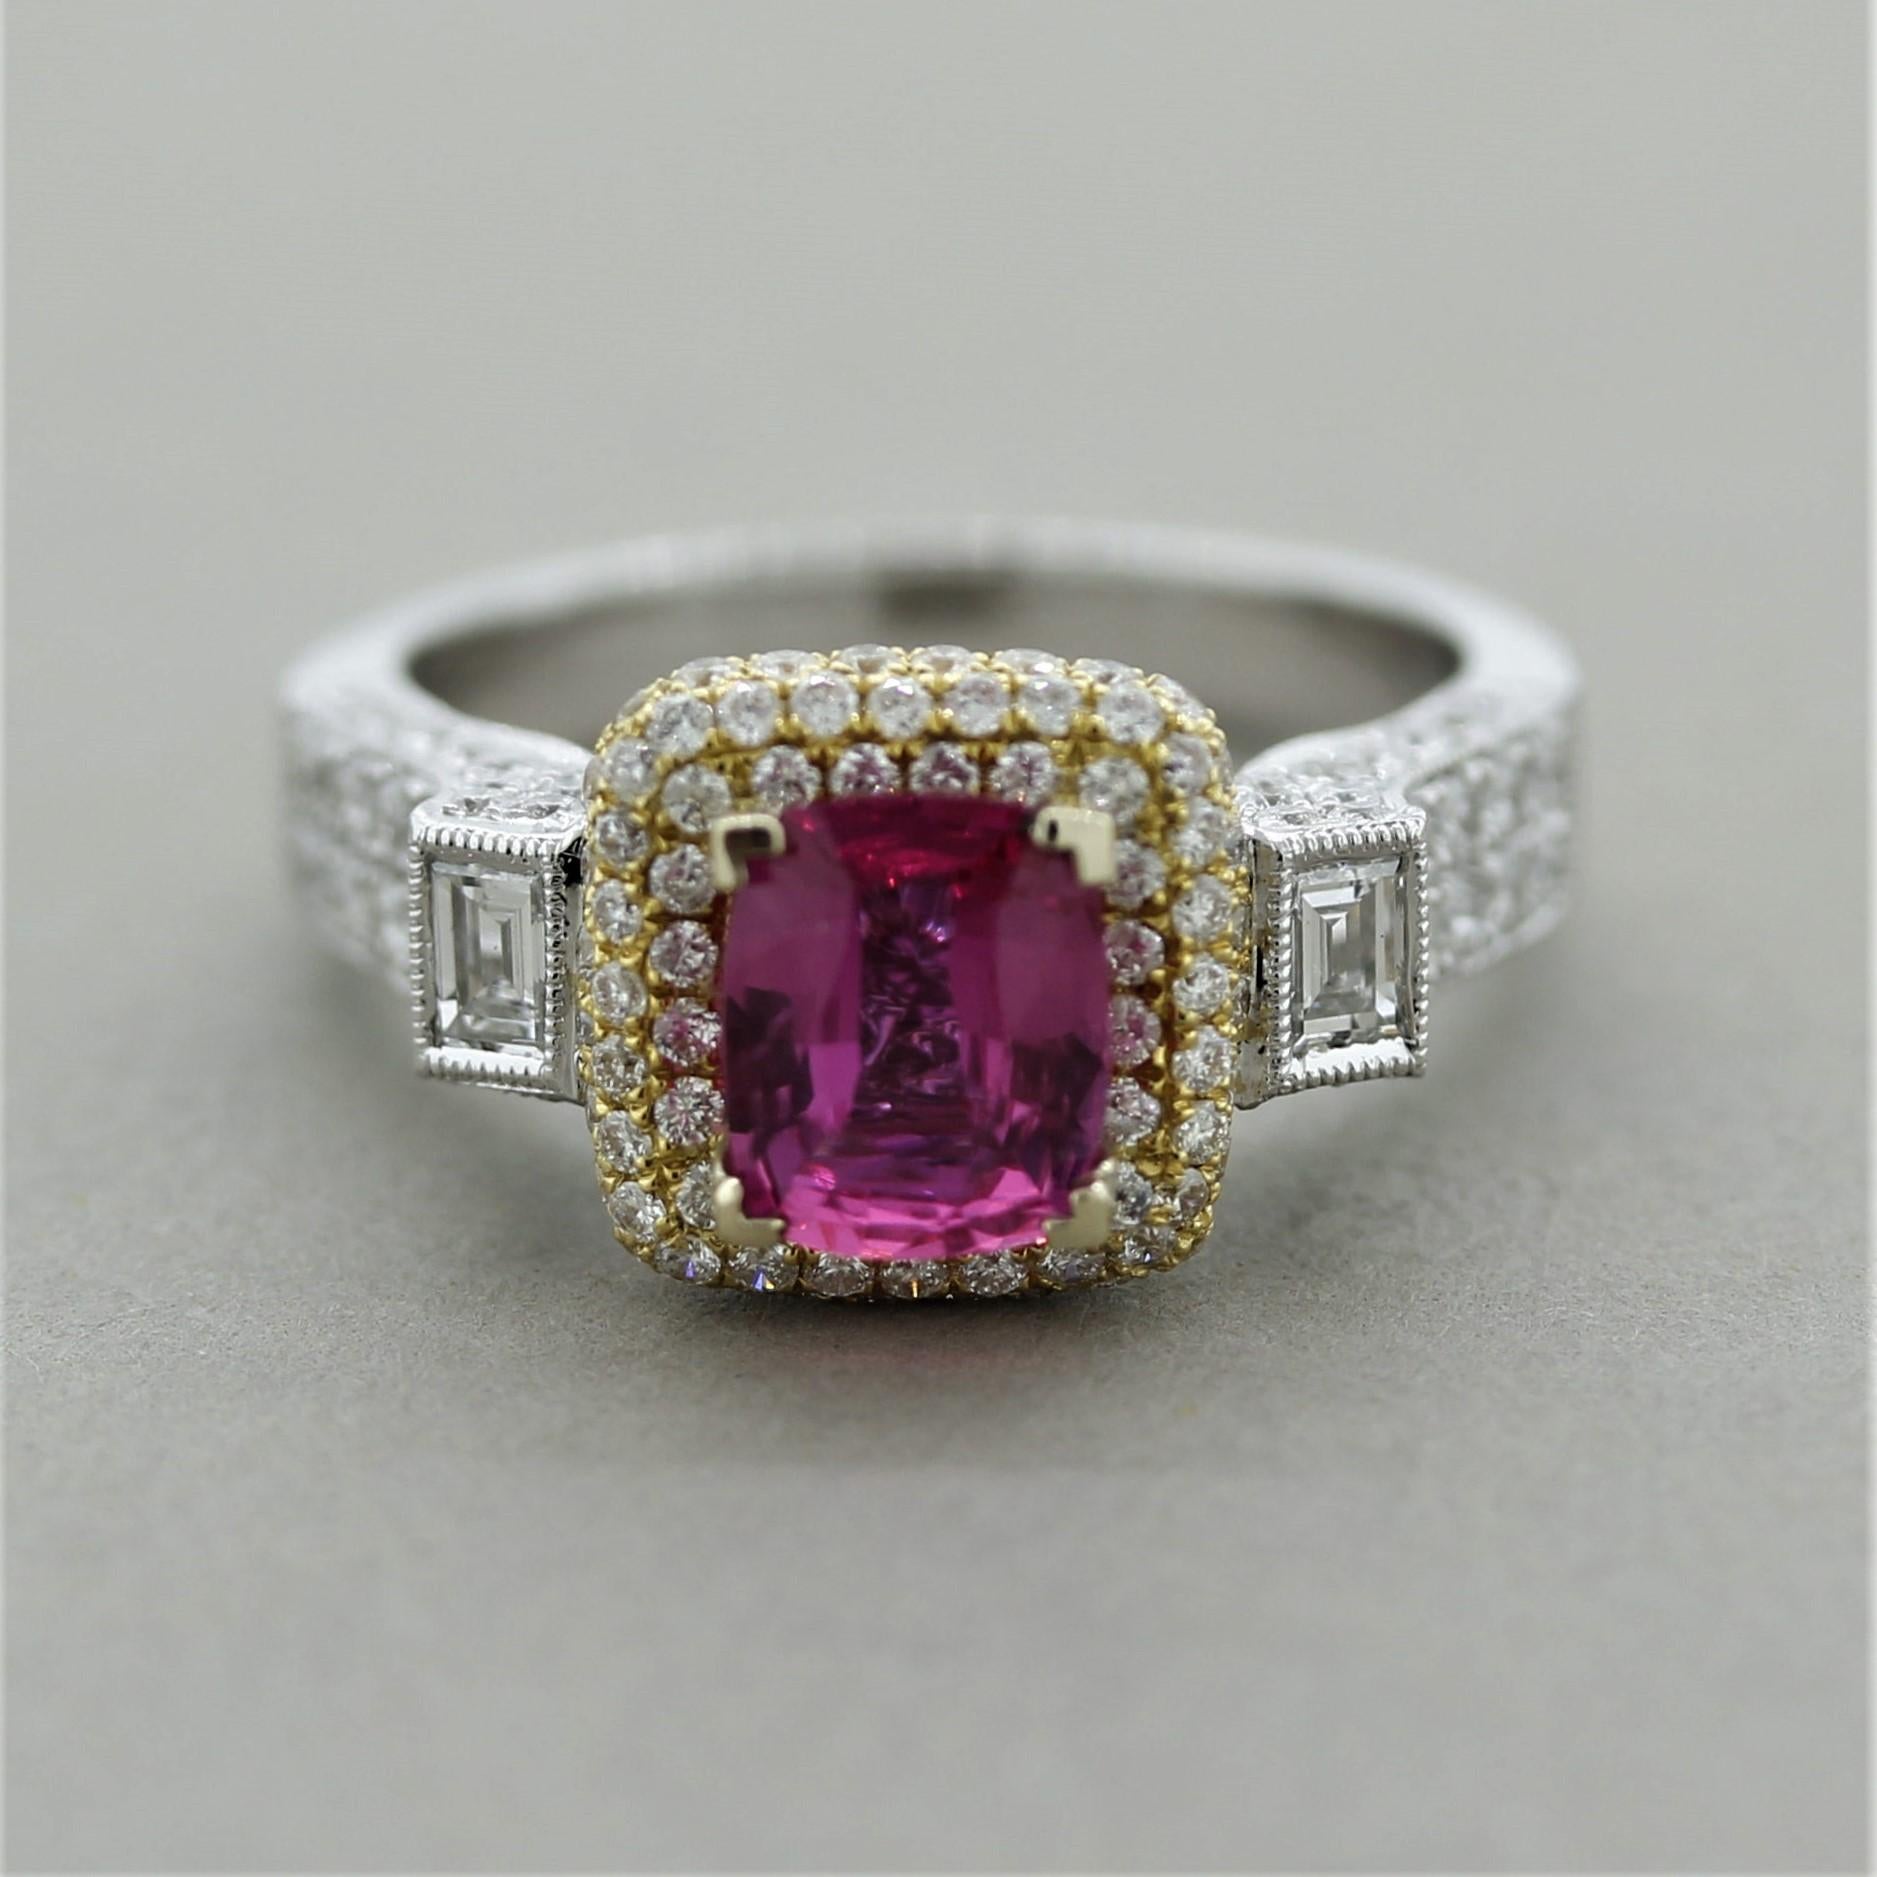 A luscious gemstone ring featuring a 1.25 carat vivid pink sapphire with a hint of red. It is cushion shaped and accented by 1.45 carats of round brilliant and baguette cut diamonds. Made in 18k gold, the sapphire is set in rose gold while the rest